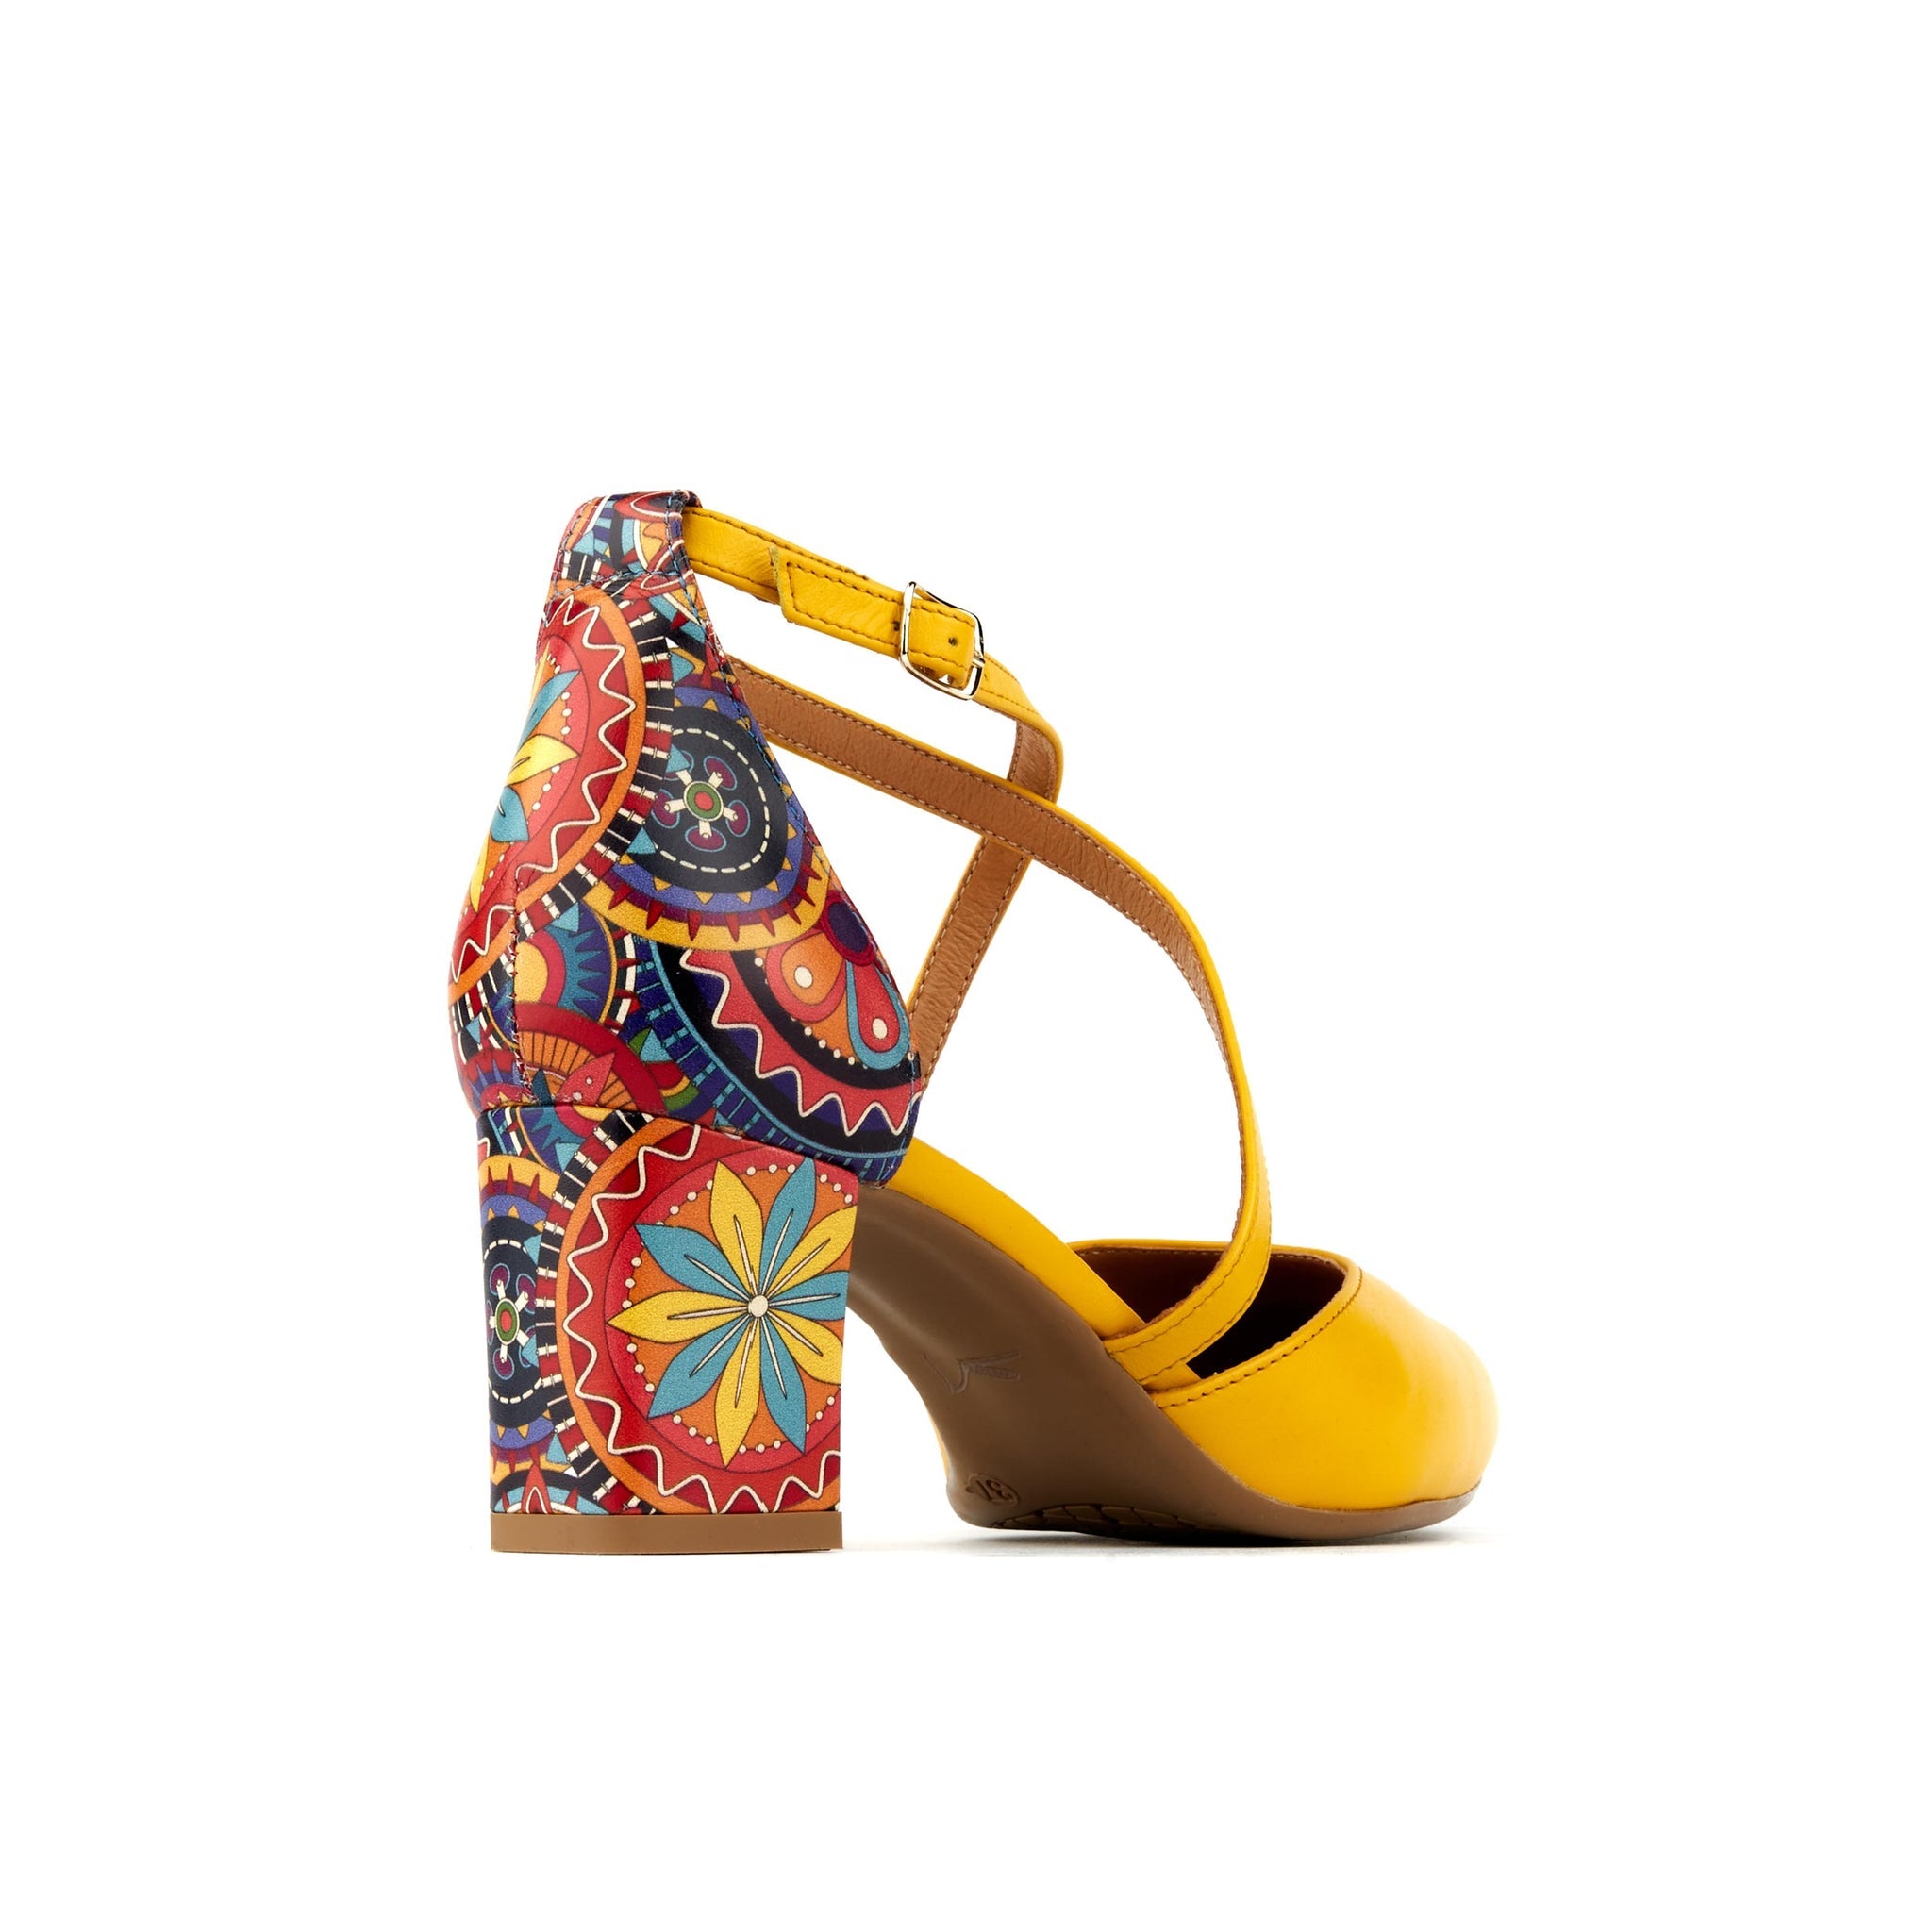 Embassy London Danni Ladies Yellow And Signature Print Leather Buckle Heels